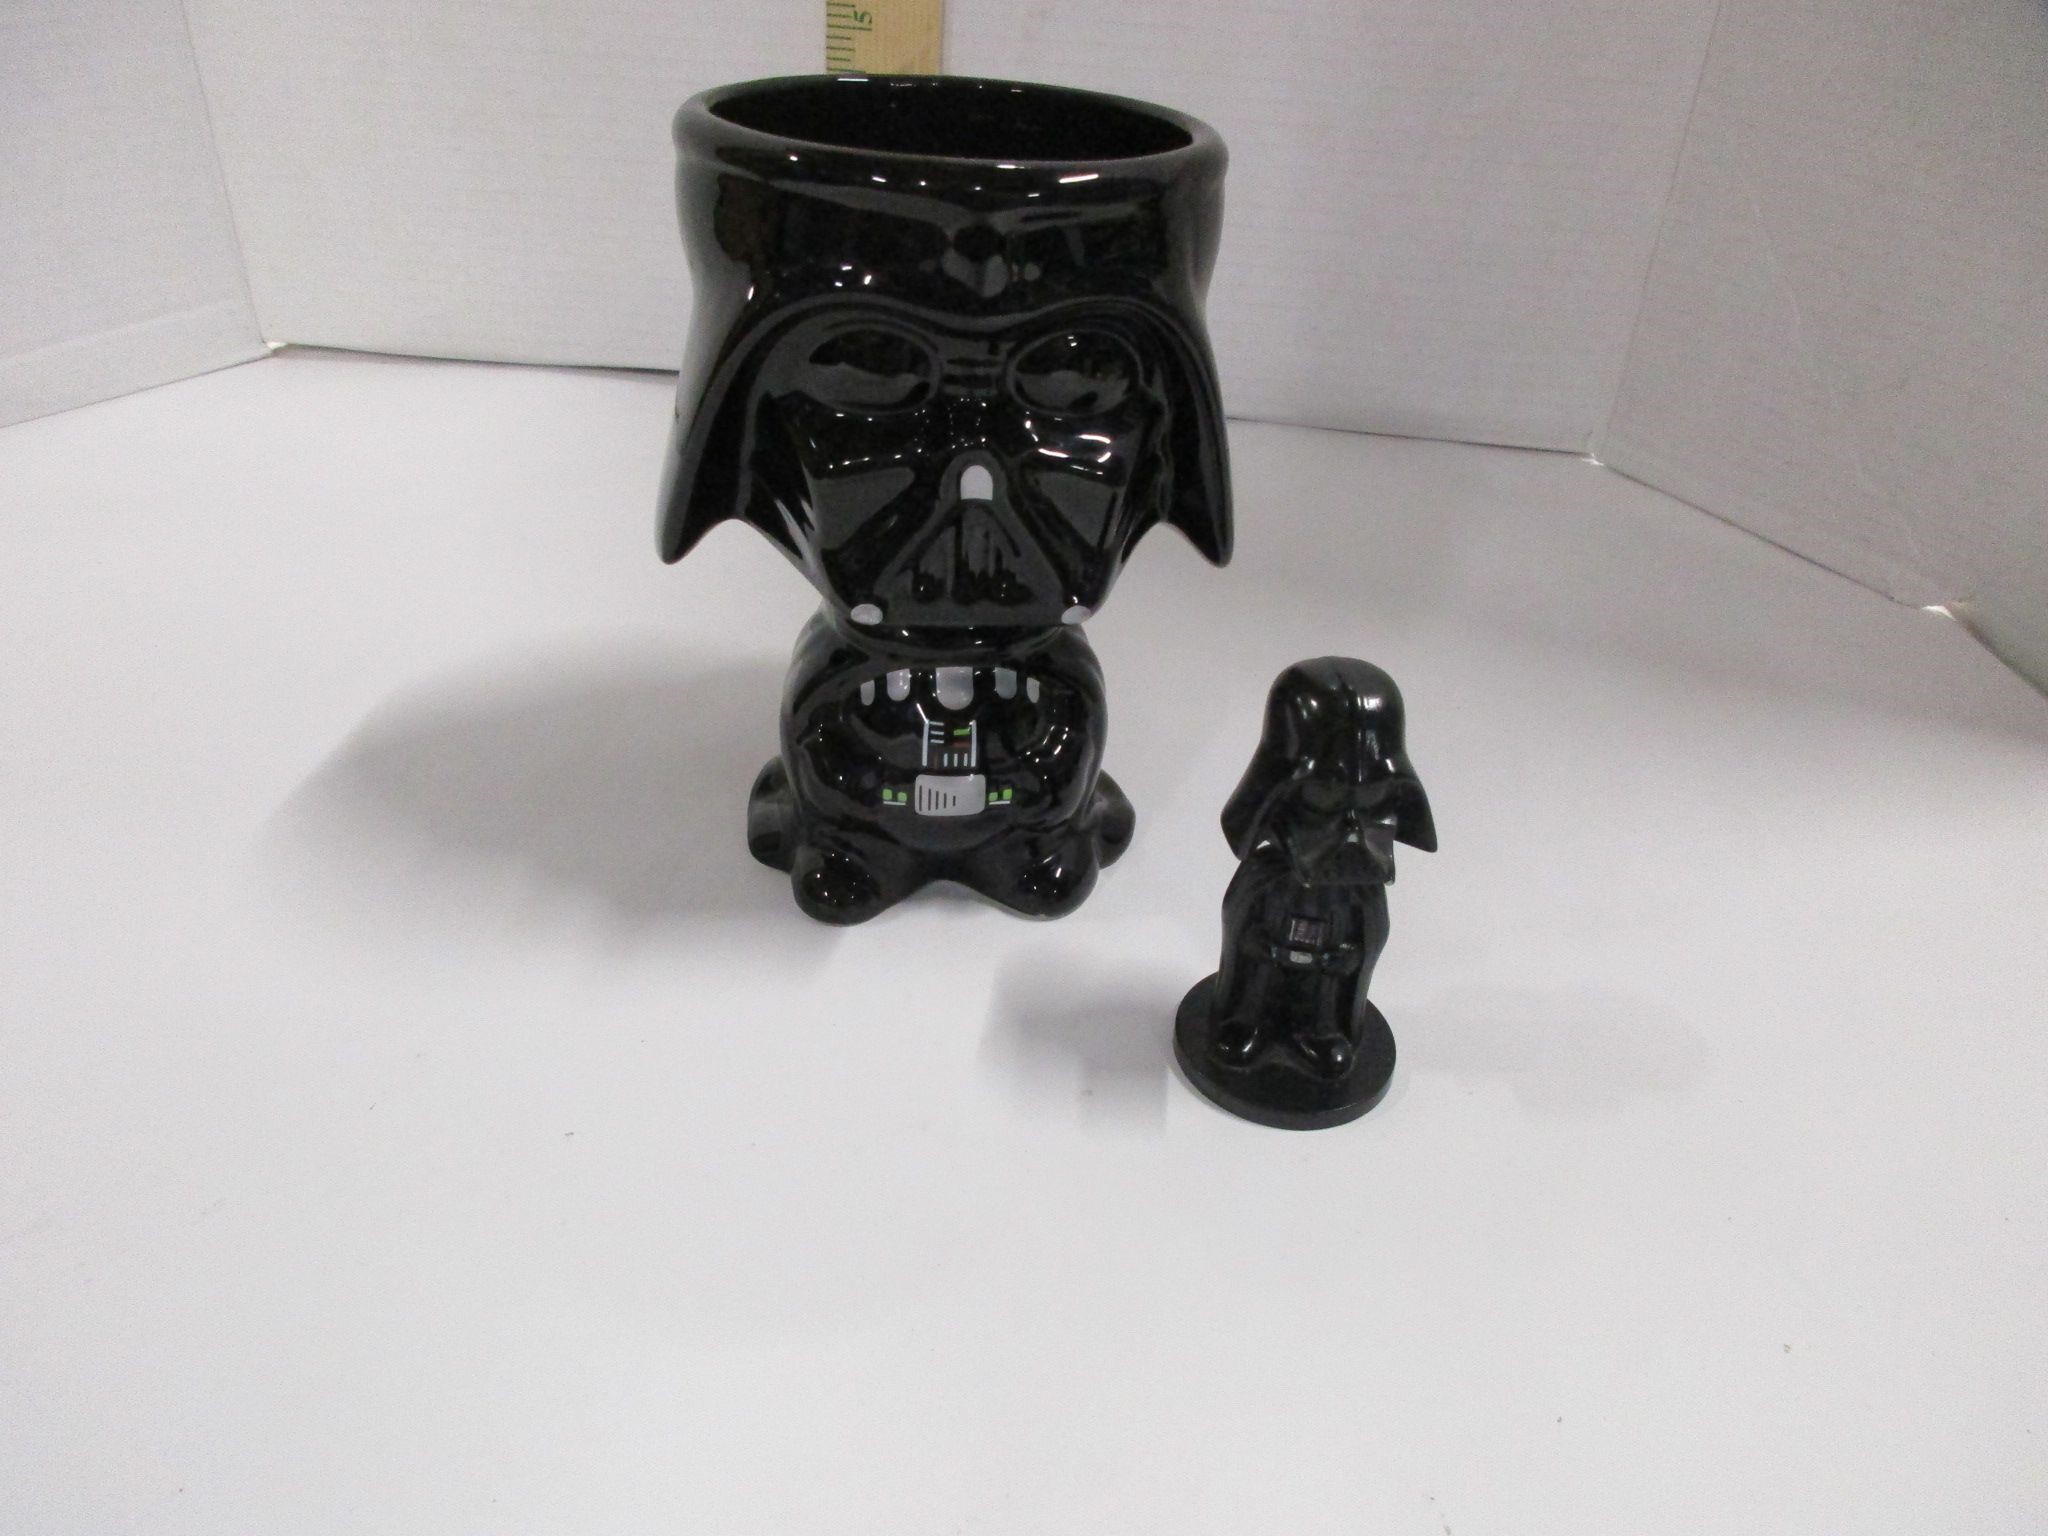 Darth Vader cup and bobble head